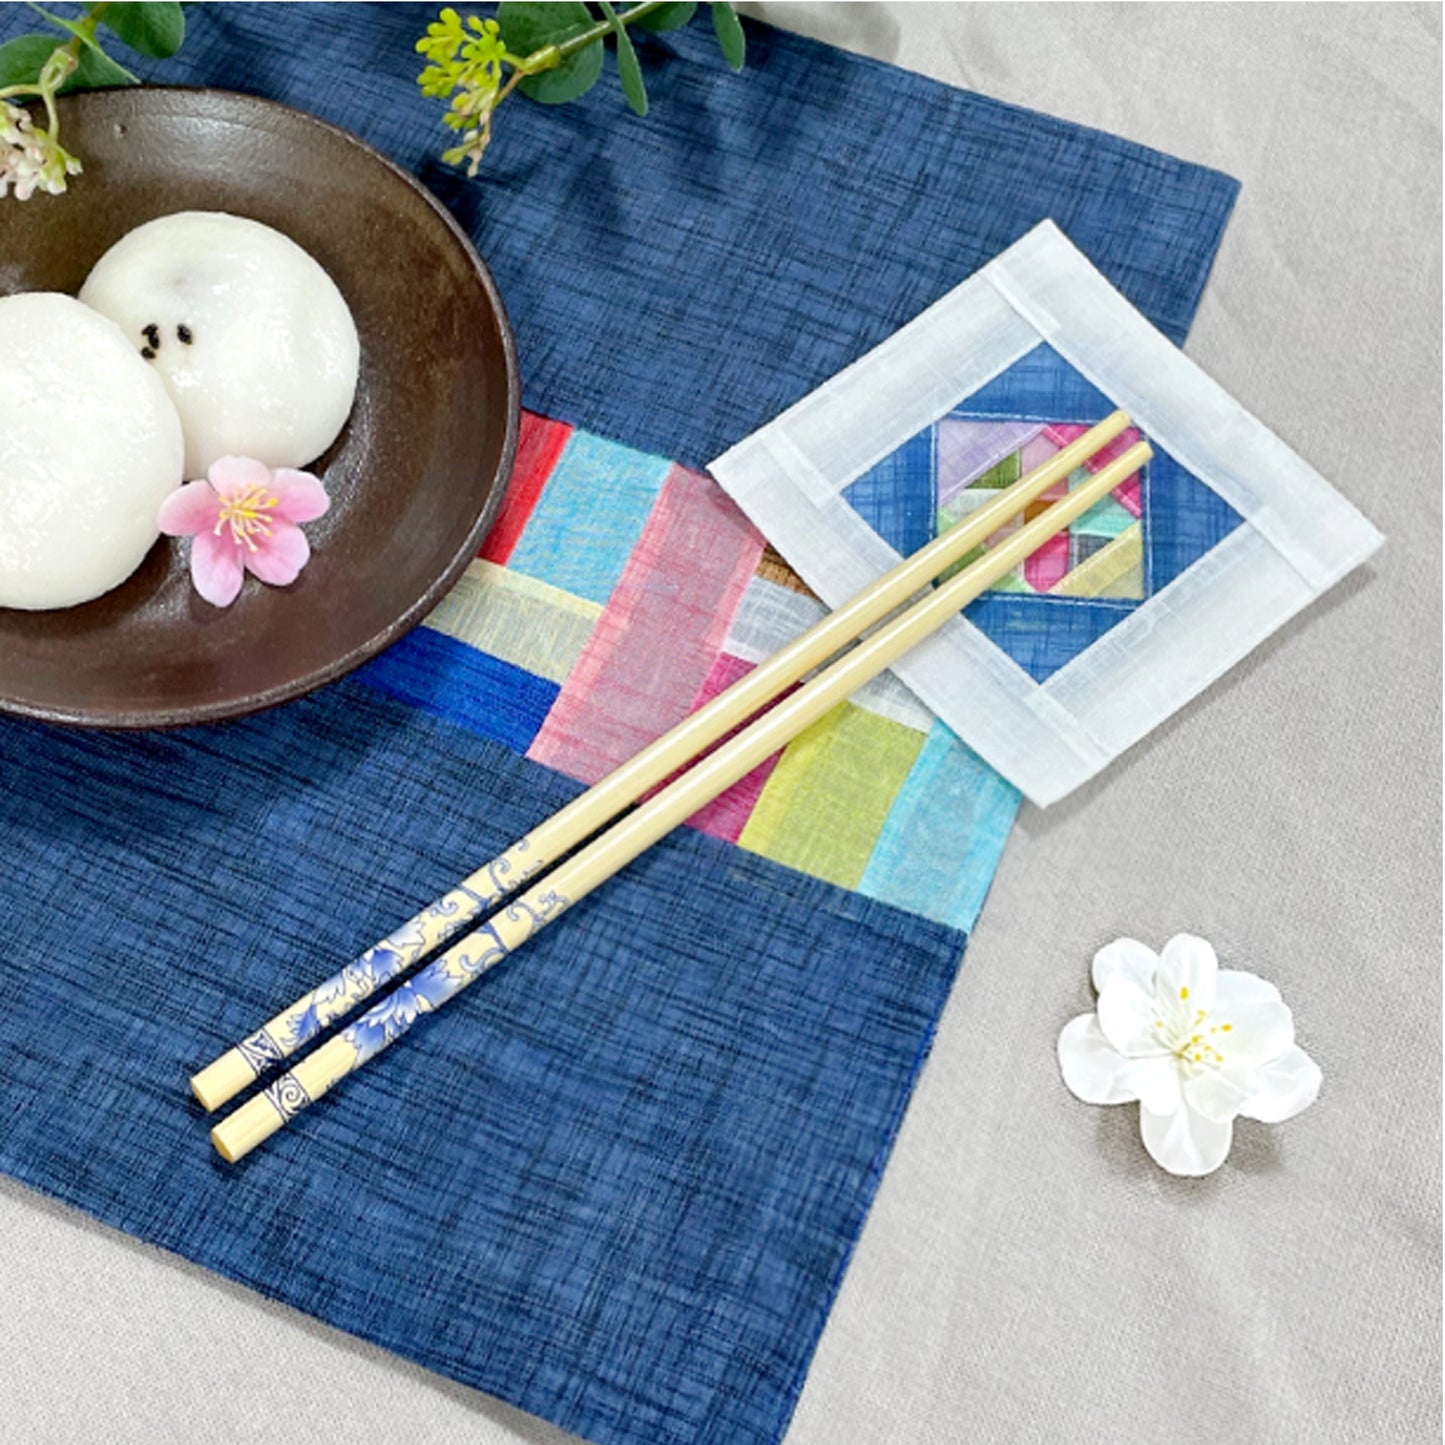 Table mat by ramie fabric, Korea Traditional Patch work design